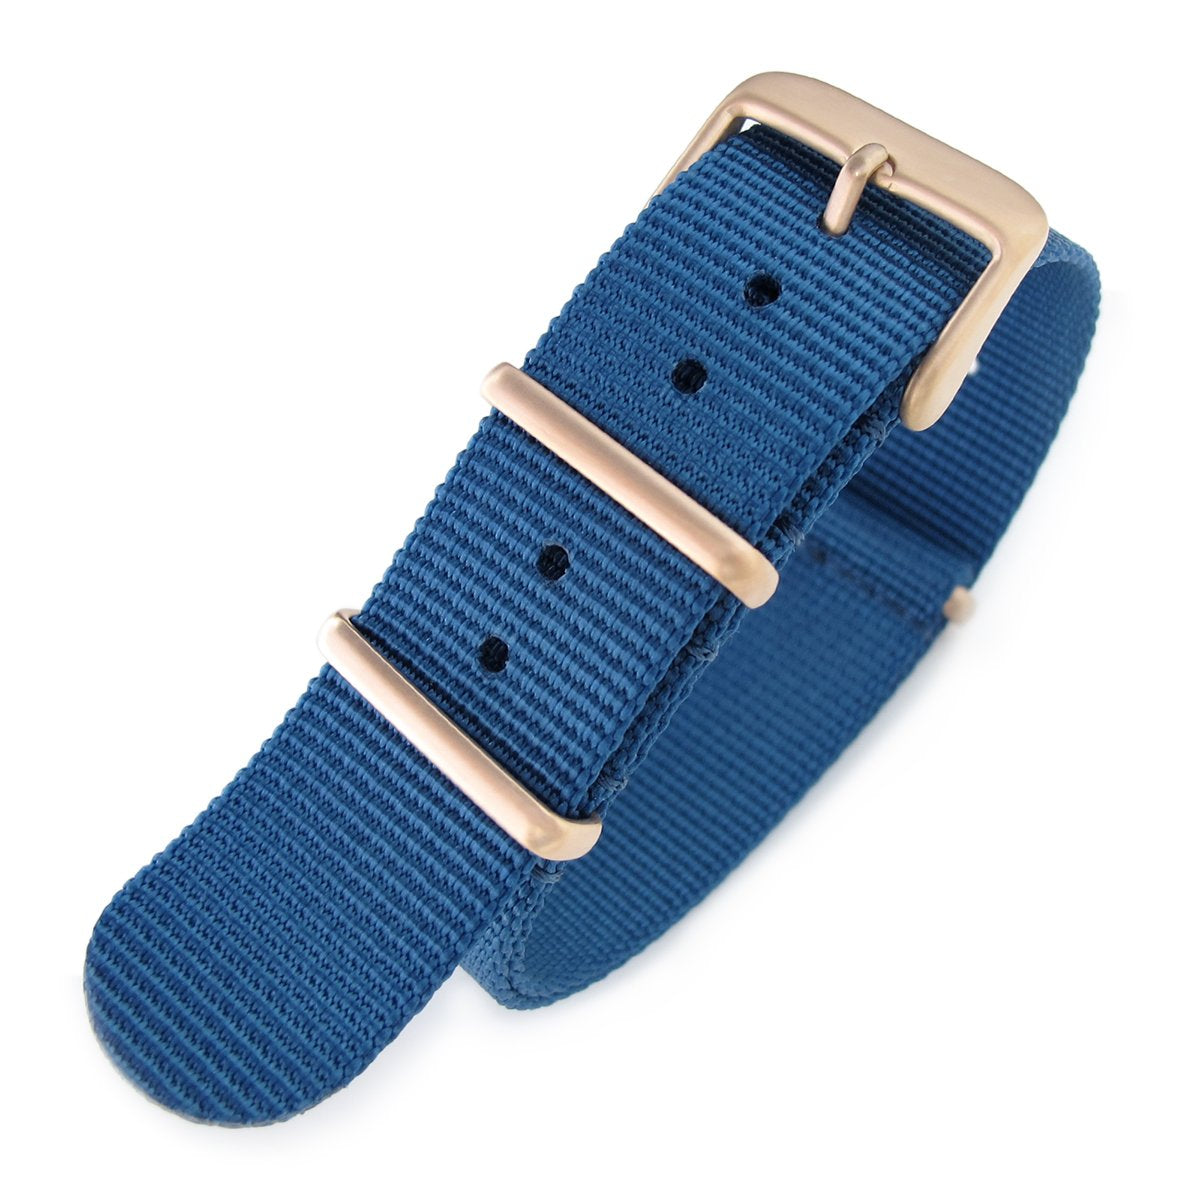 NATO 20mm G10 Military Watch Band Nylon Strap Blue IP Champagne 260mm Strapcode Watch Bands